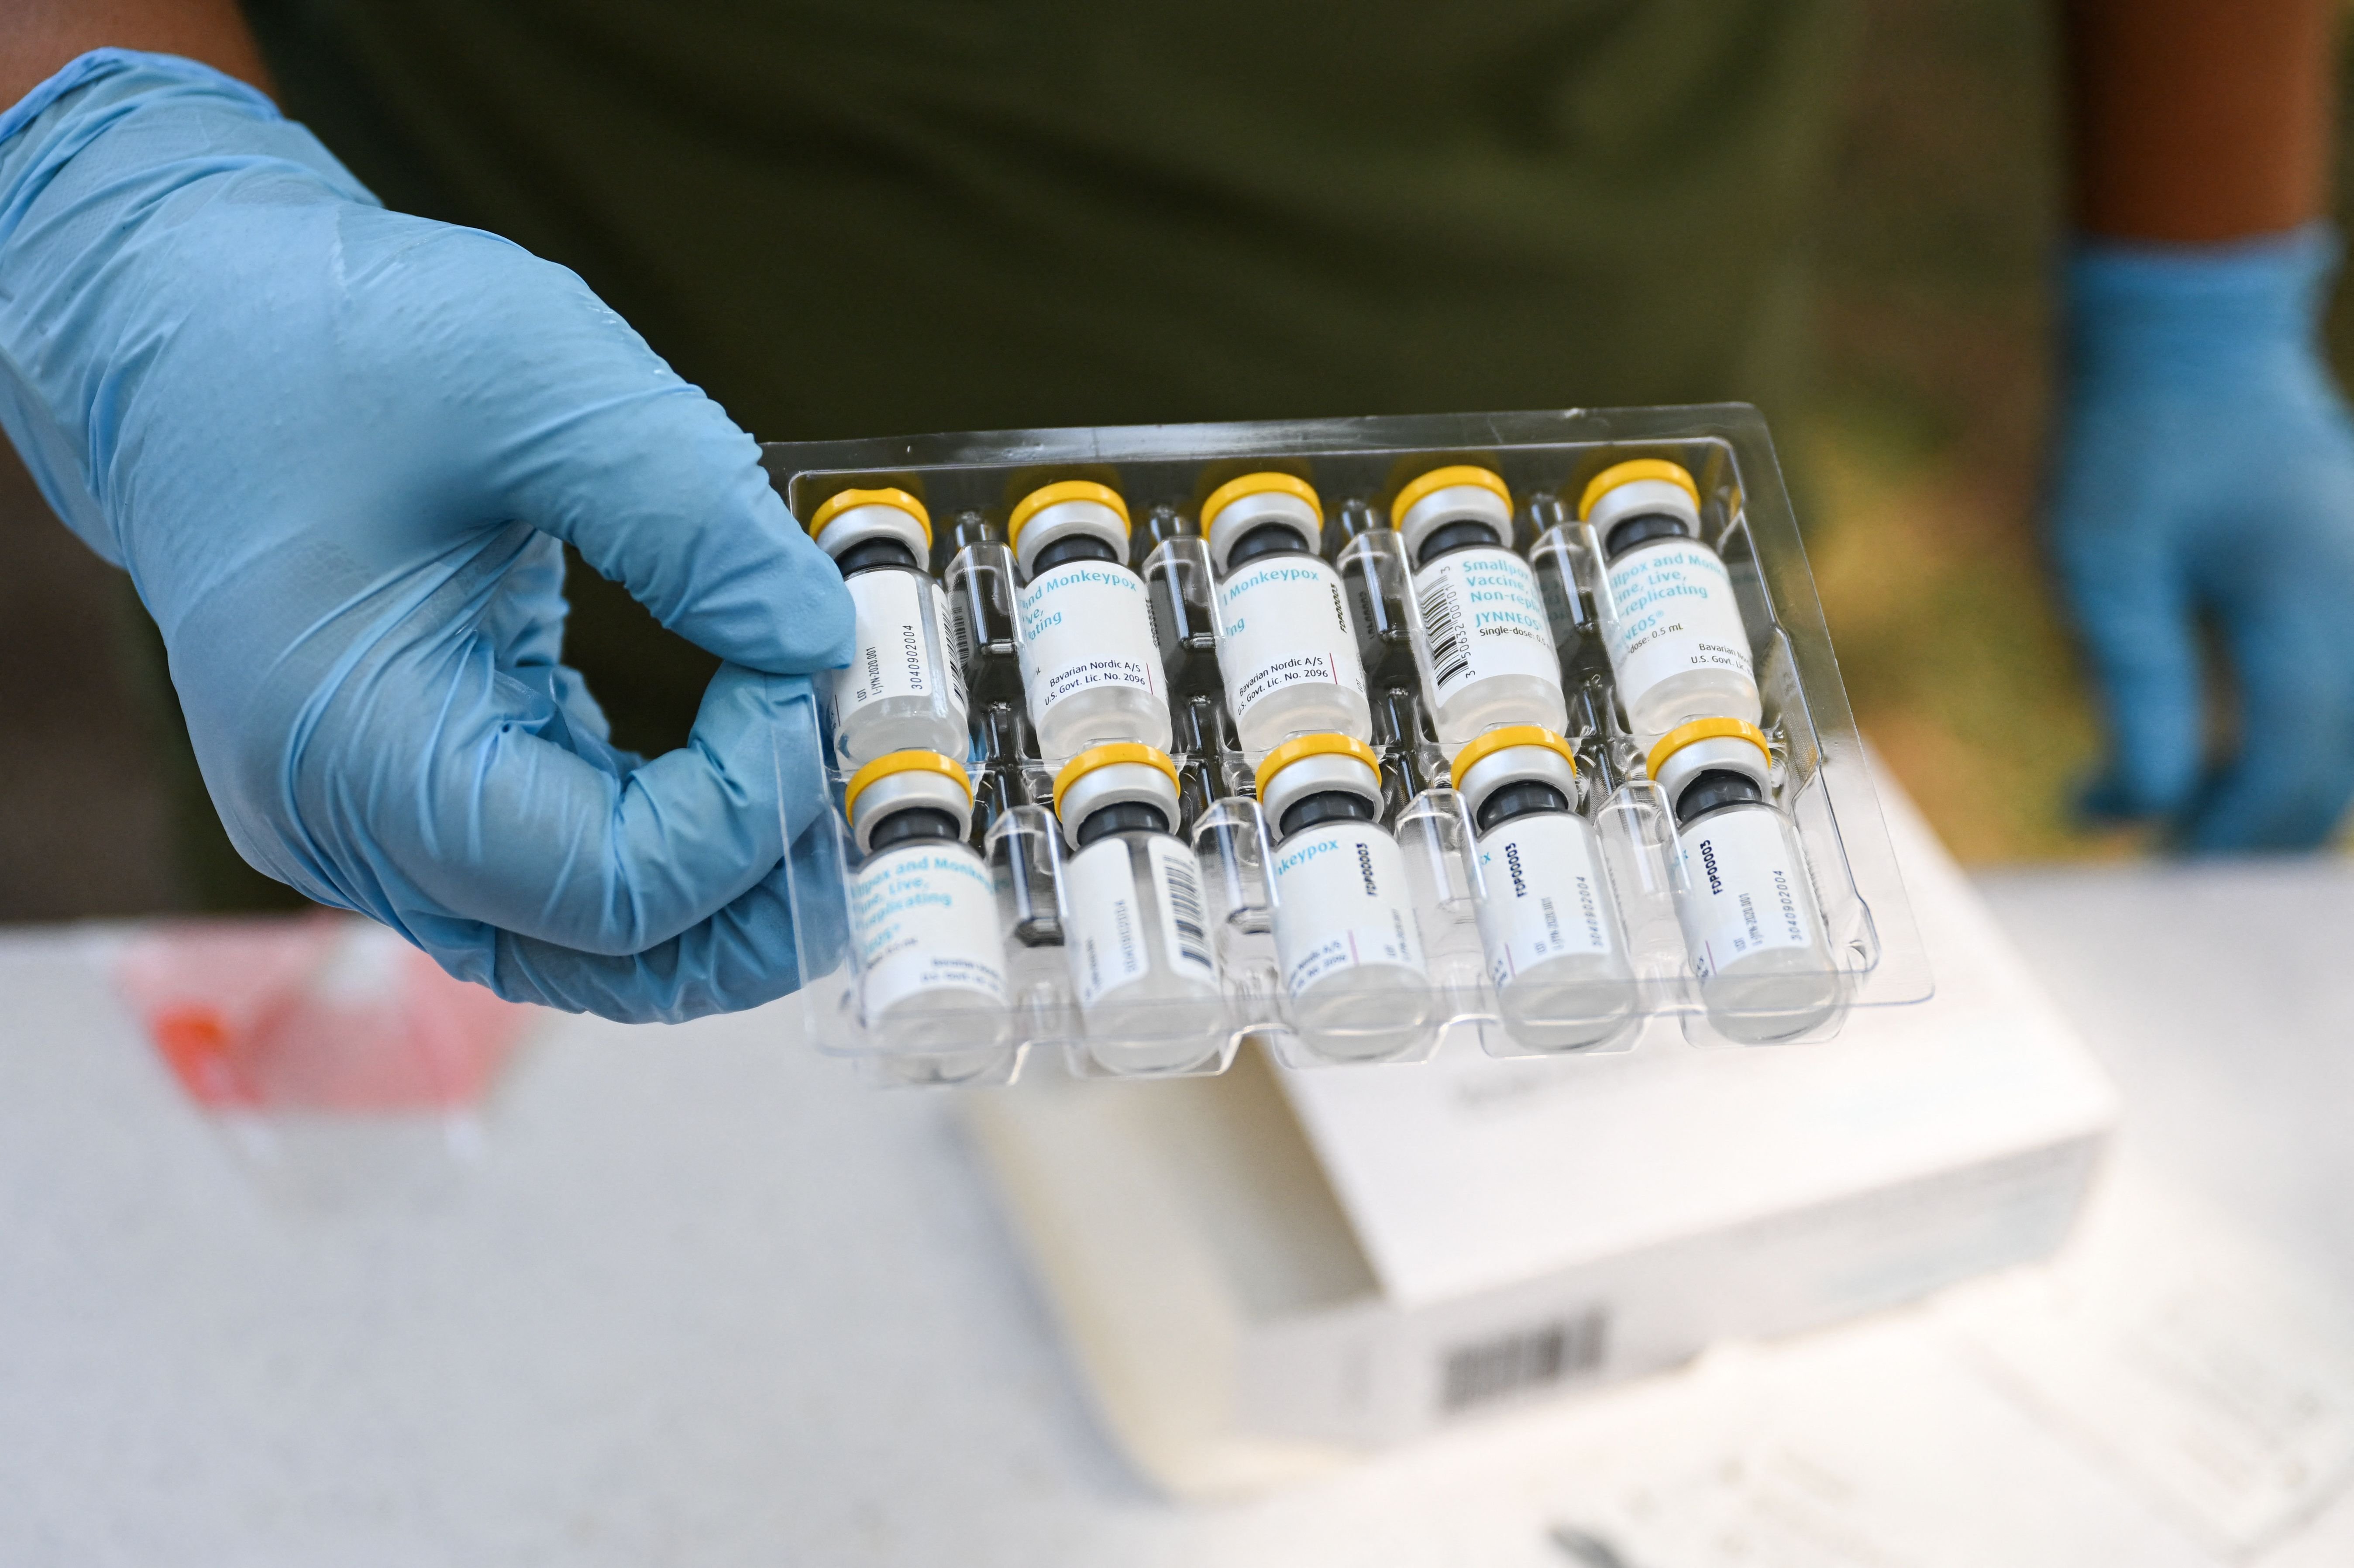 Vials of the JYNNEOS Monkeypox vaccine are prepared at a pop-up vaccination clinic in Los Angeles, California, U.S., Aug. 9, 2022. (Photo by Patrick T. FALLON / AFP)